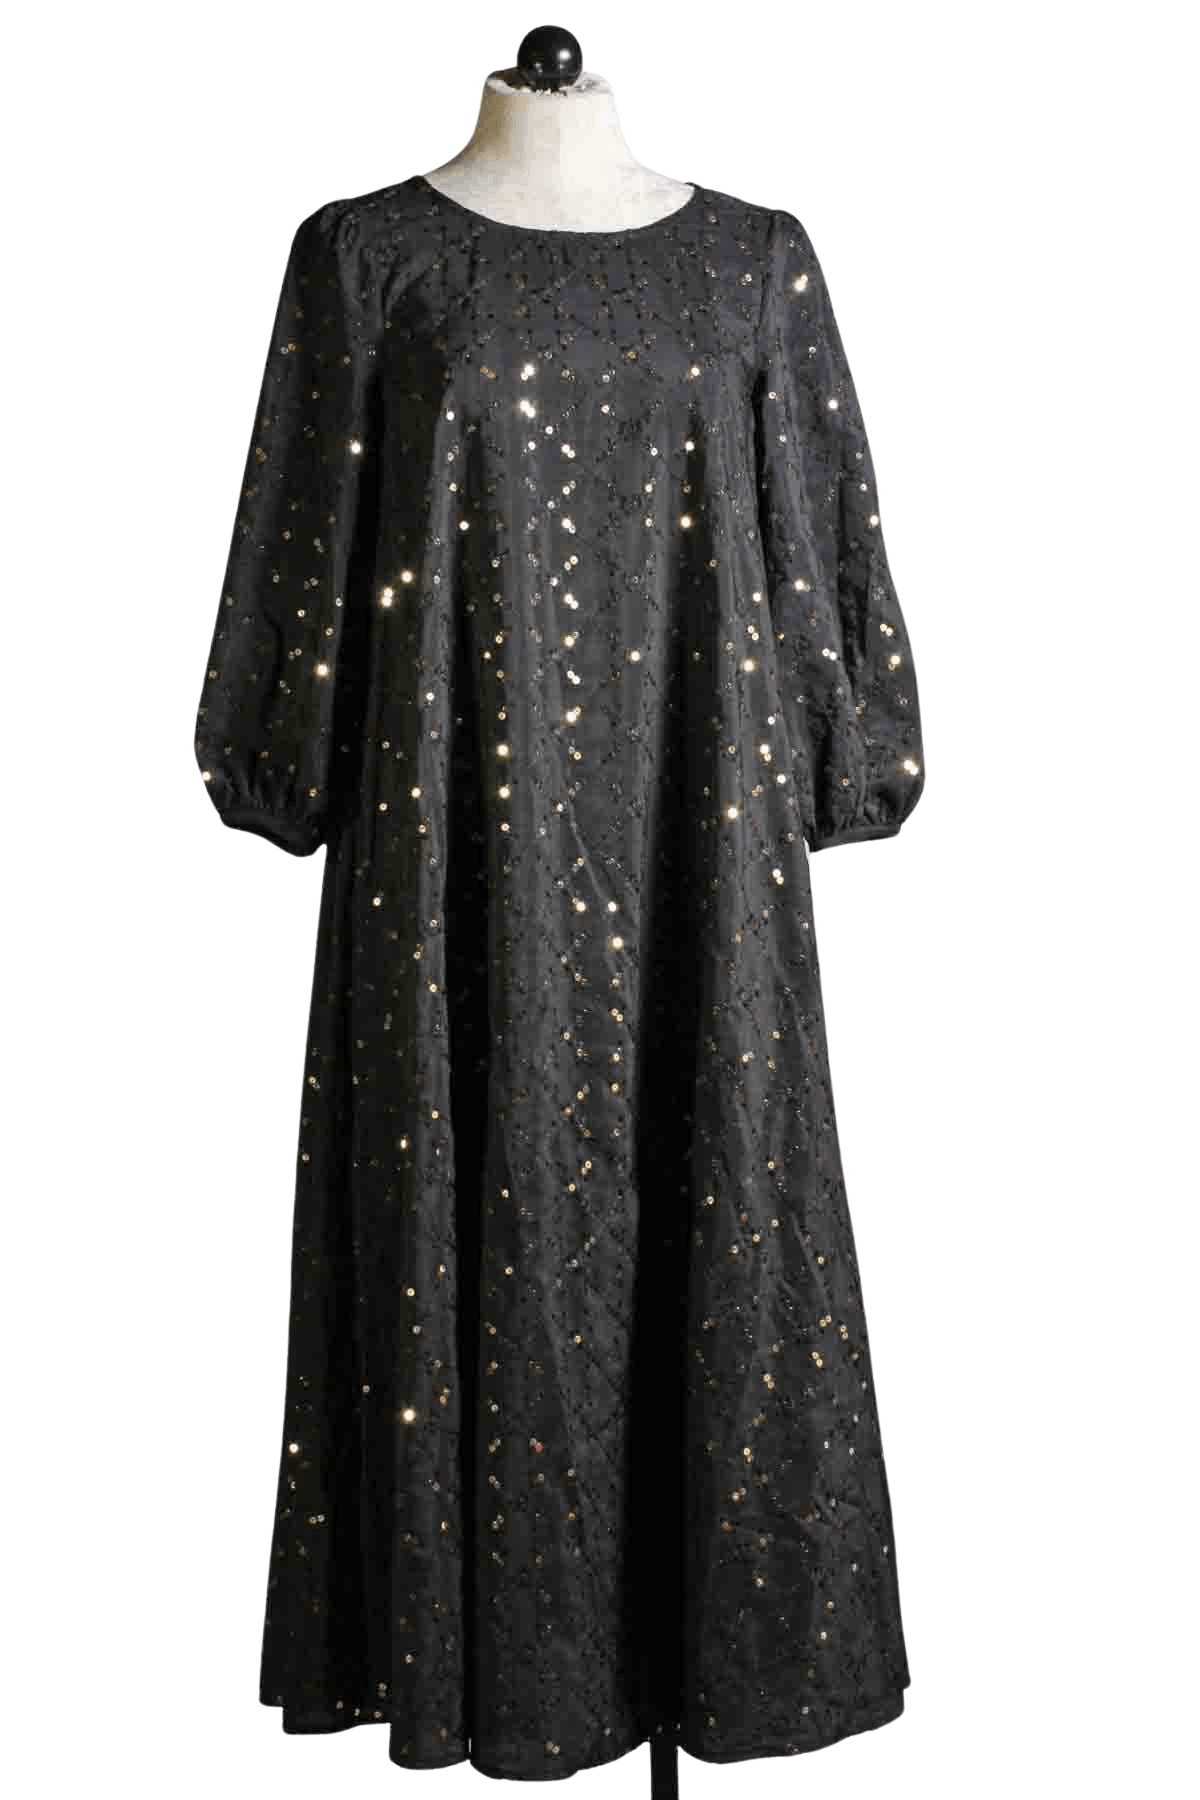 Black with Gold Sequins Willow Dress by Traffic People with a Belt option included, shown without the belt here